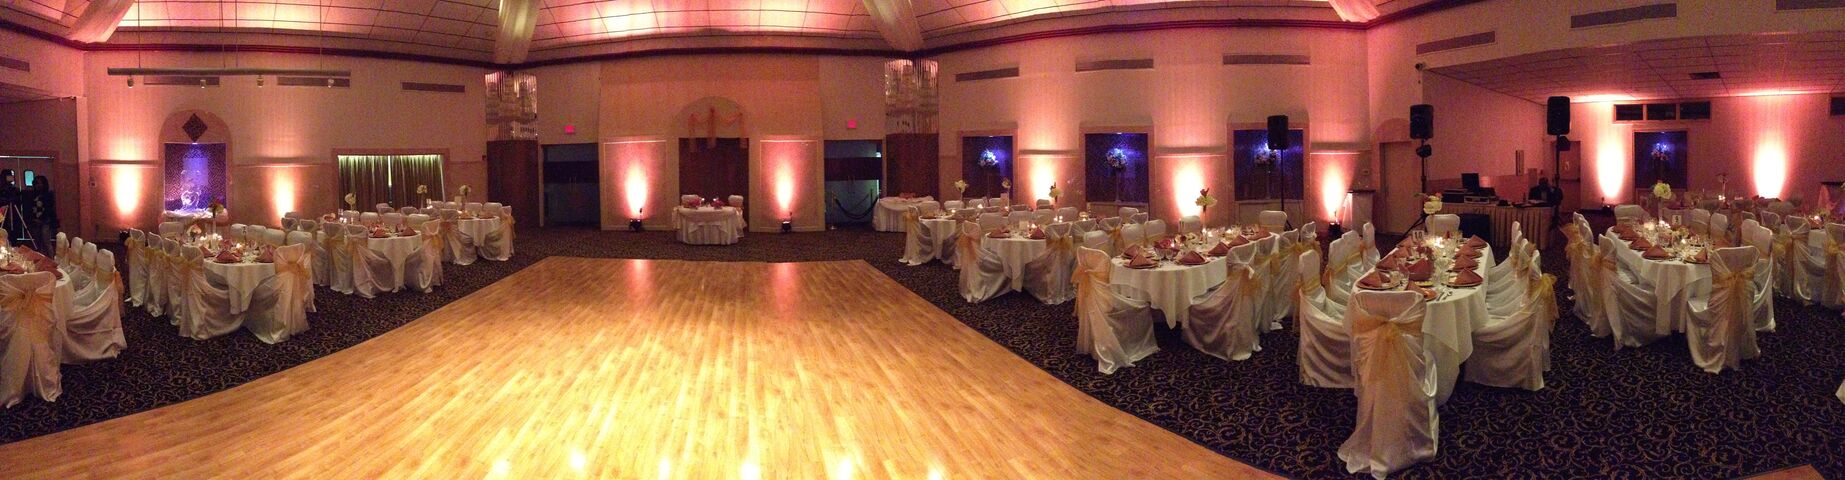 The Washington Banquet Hall and Catering Turnersville  NJ 